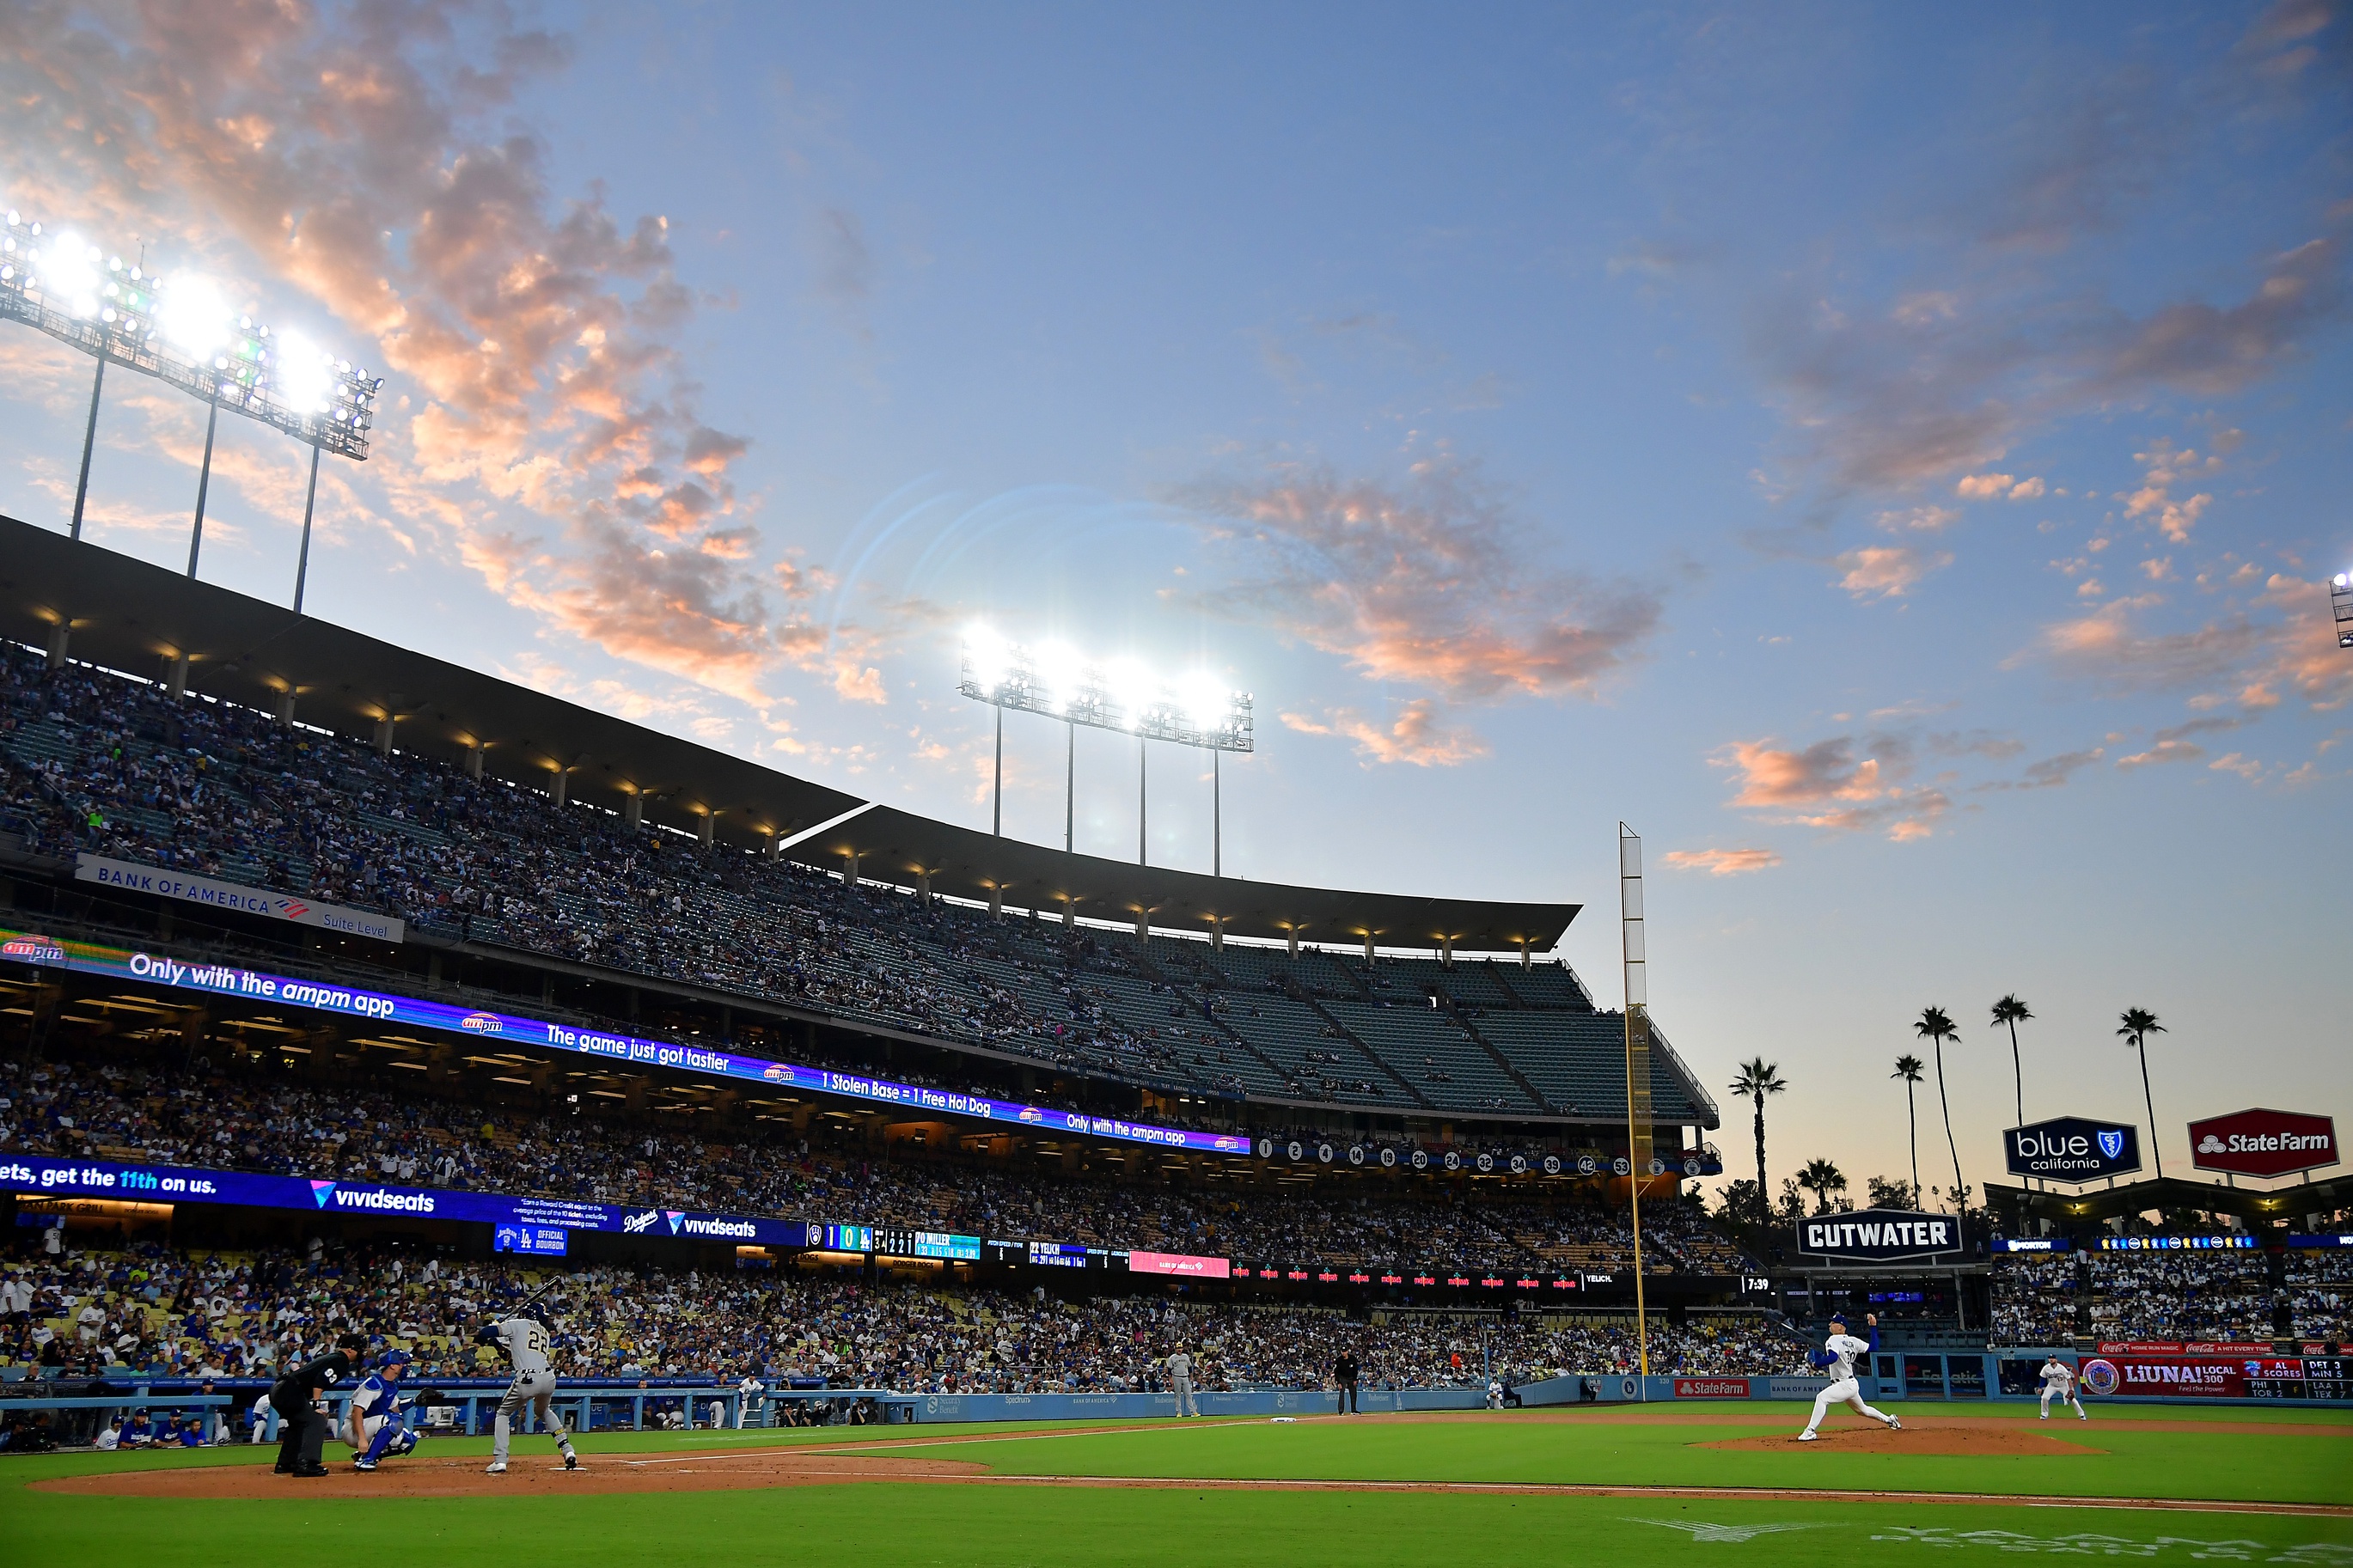 LOS ANGELES DODGERS - Baseball & Sports Background Wallpapers on